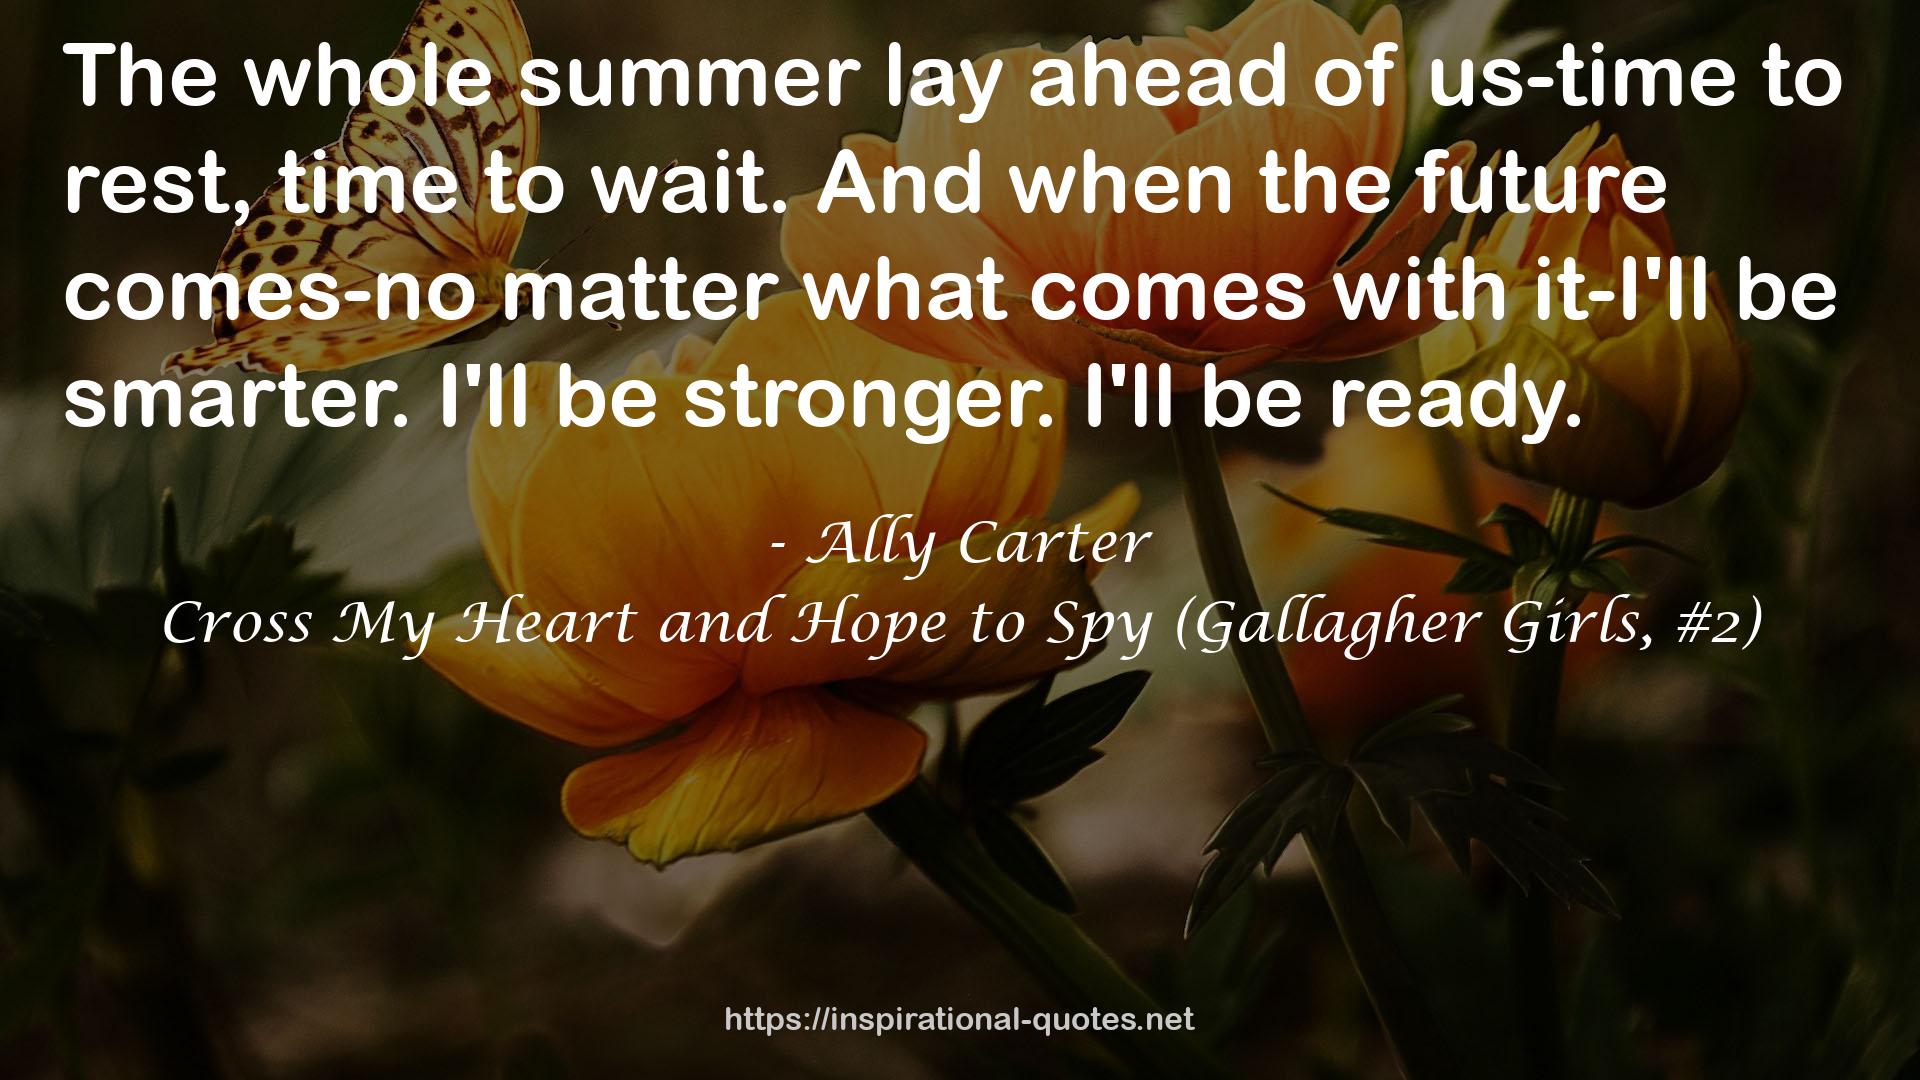 Cross My Heart and Hope to Spy (Gallagher Girls, #2) QUOTES